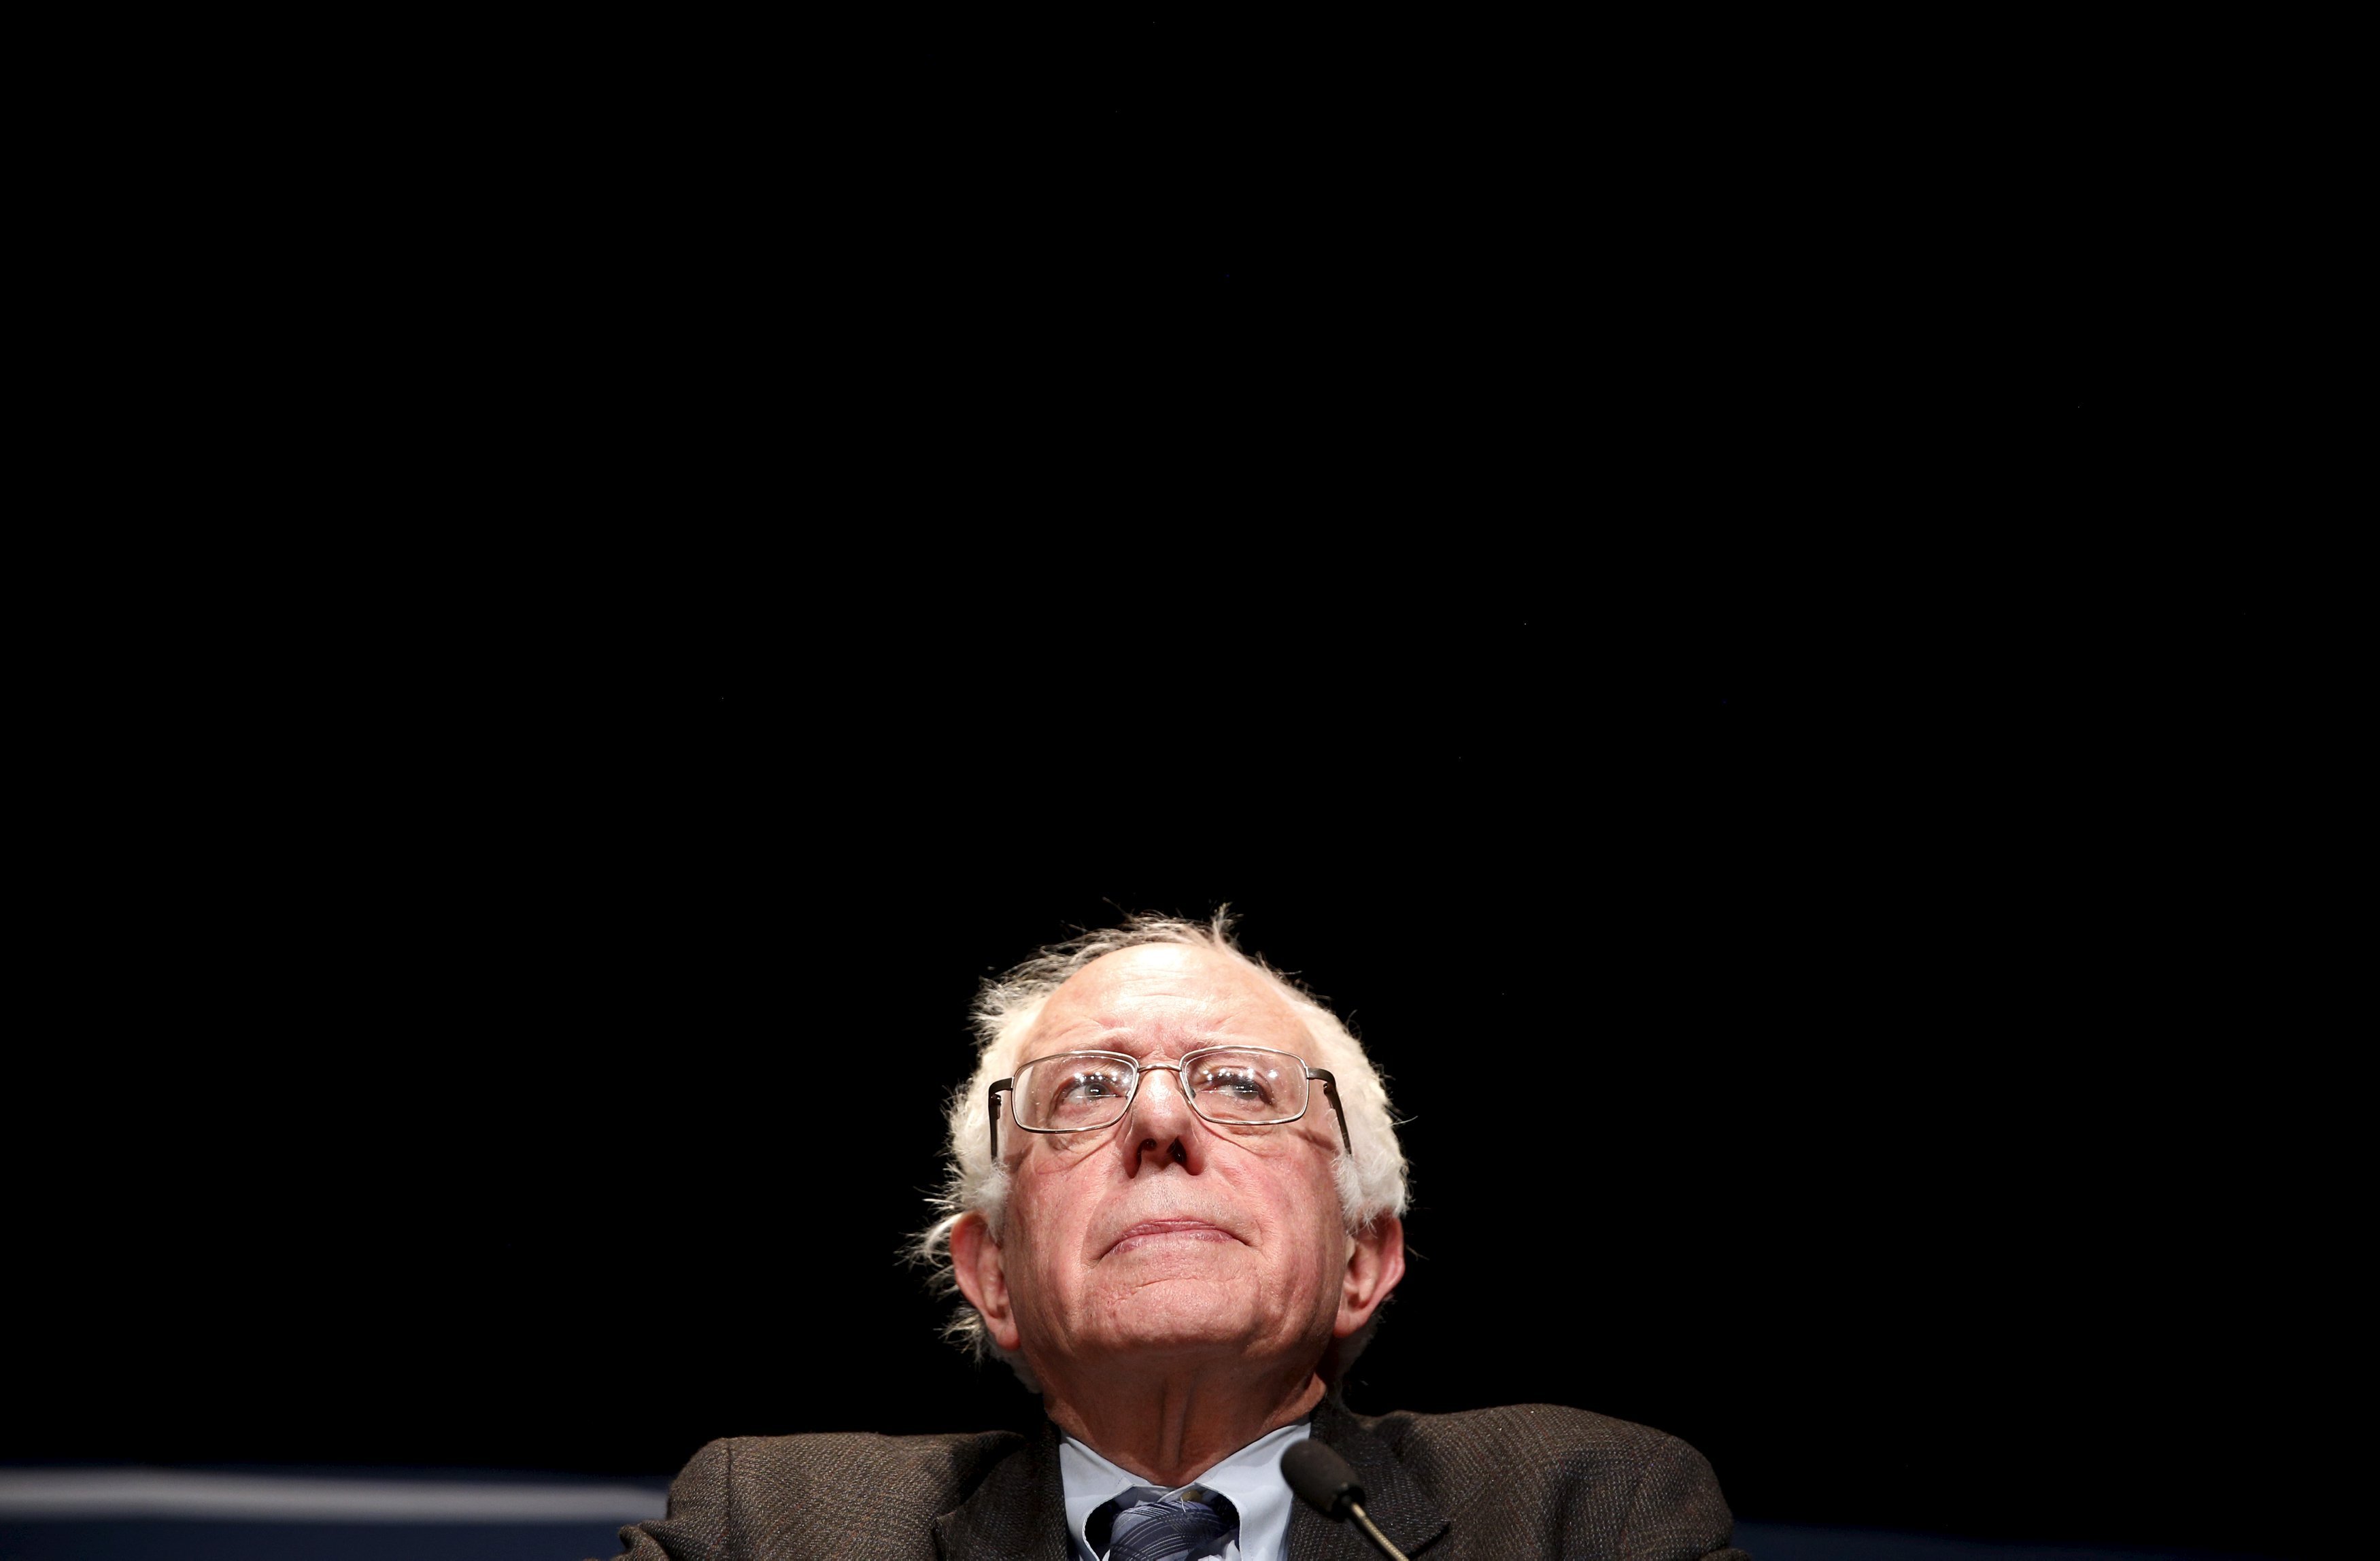 Bernie Sanders listens to a question from the audience during a campaign event at Wartburg College in Waverly, Iowa on Jan. 8, 2016 (Scott Morgan—Reuters)